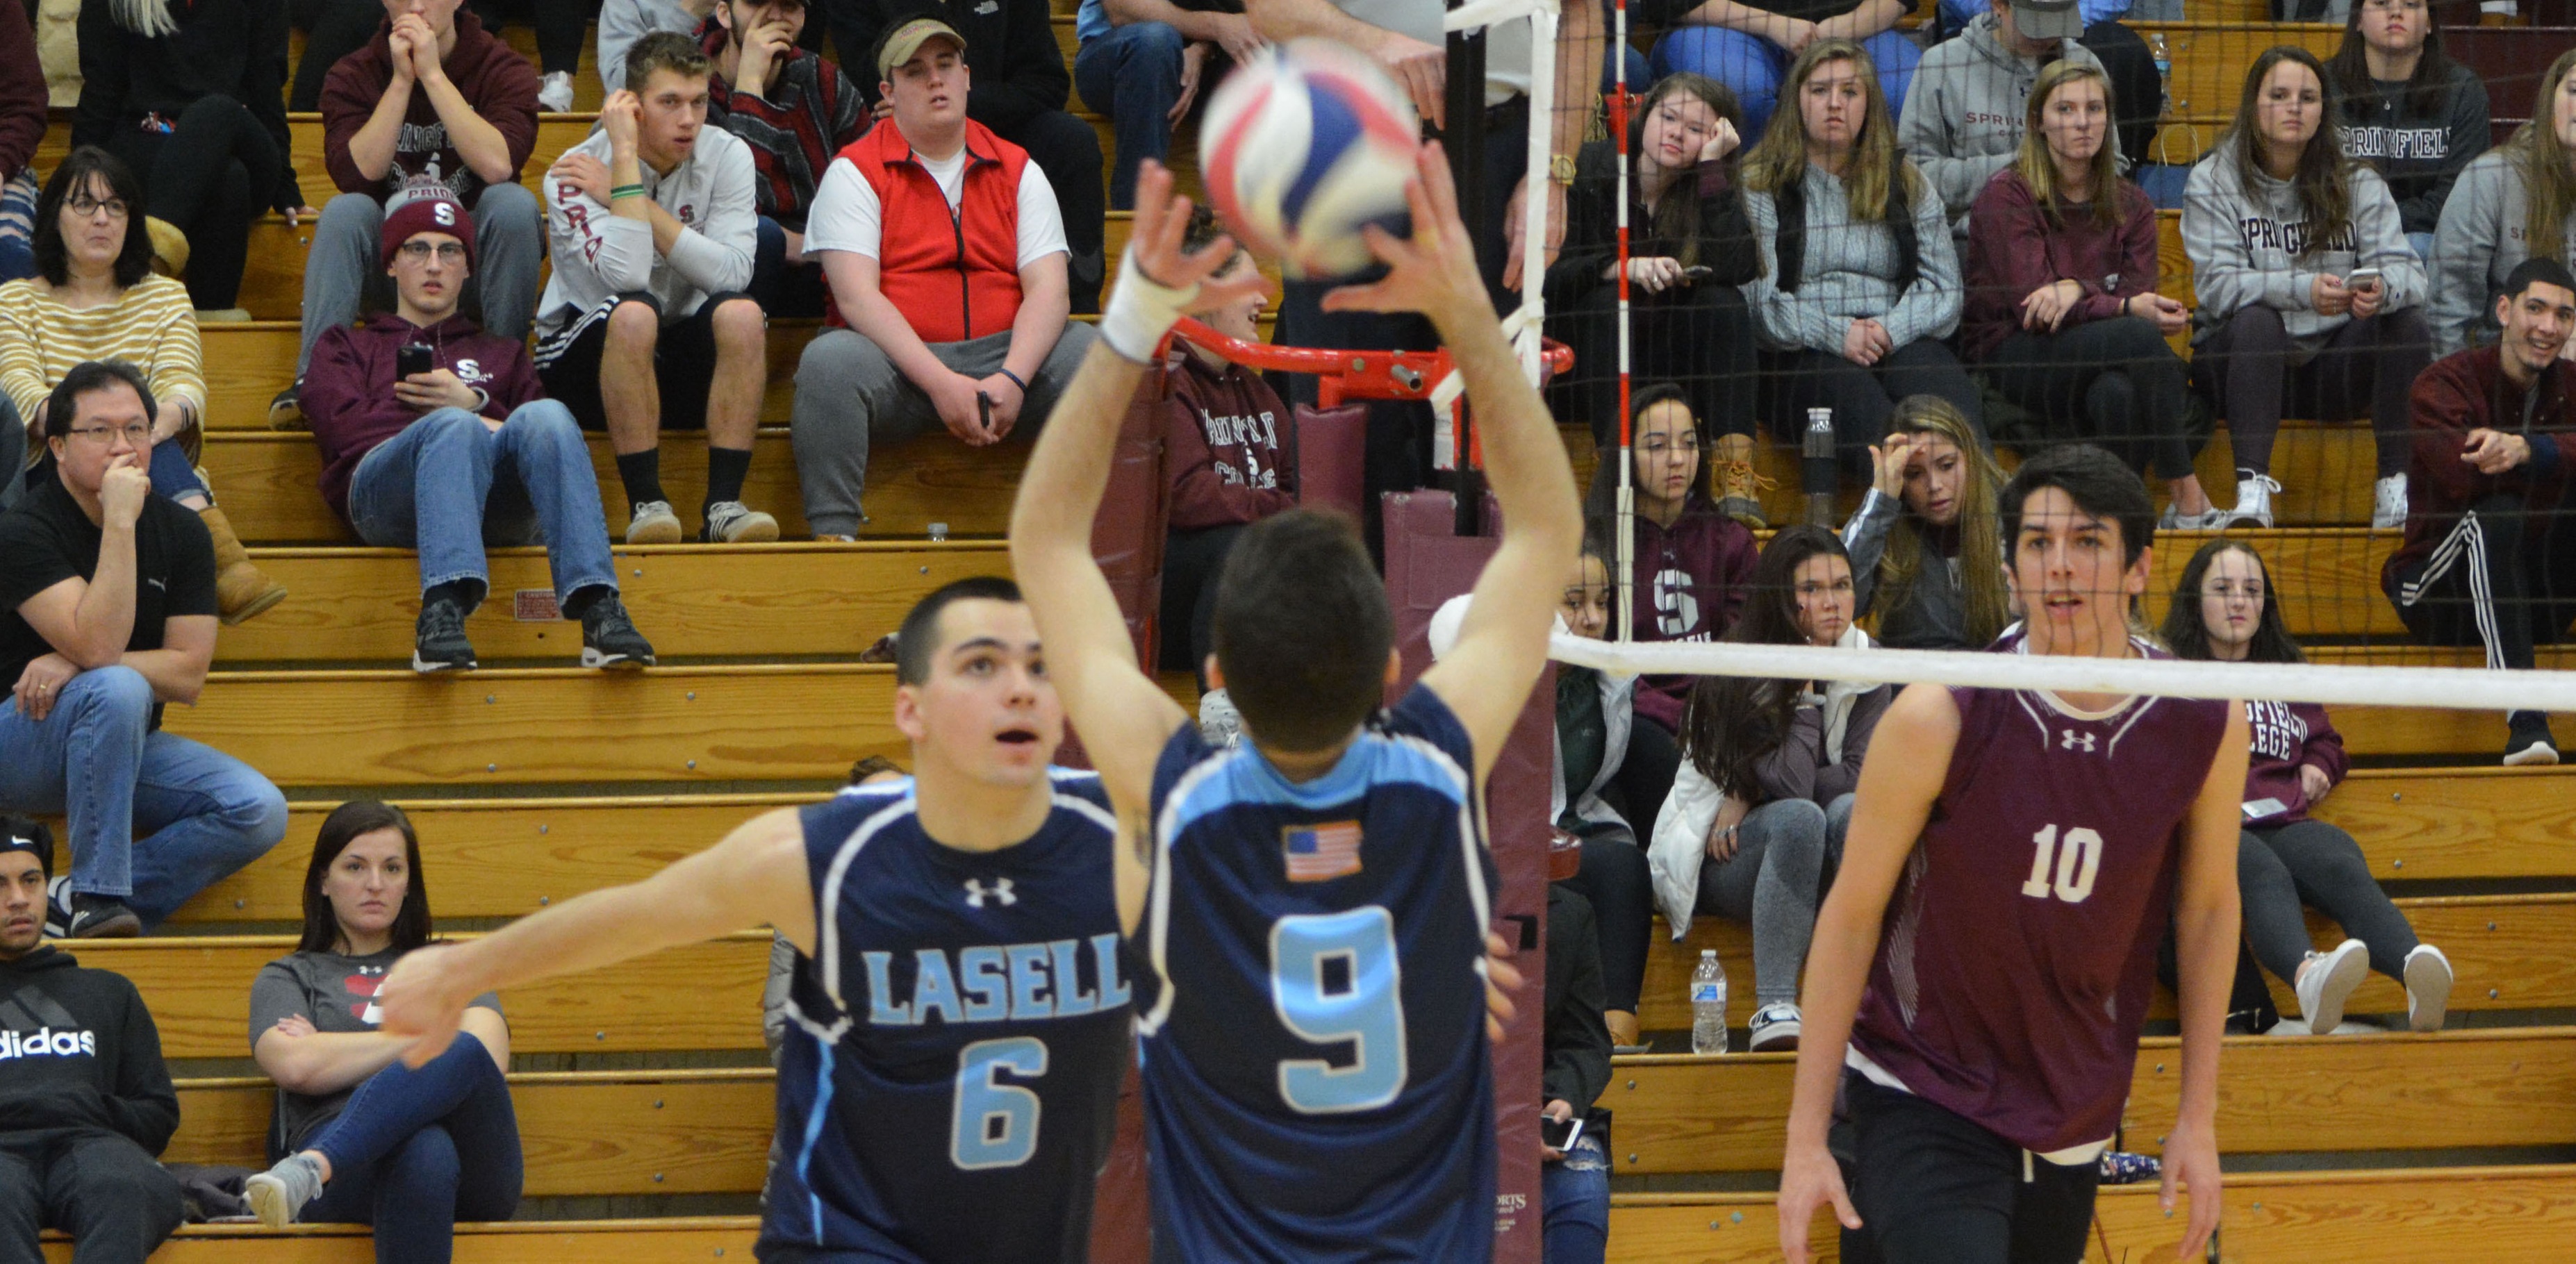 Lasell Men’s Volleyball drops match at Sacred Heart